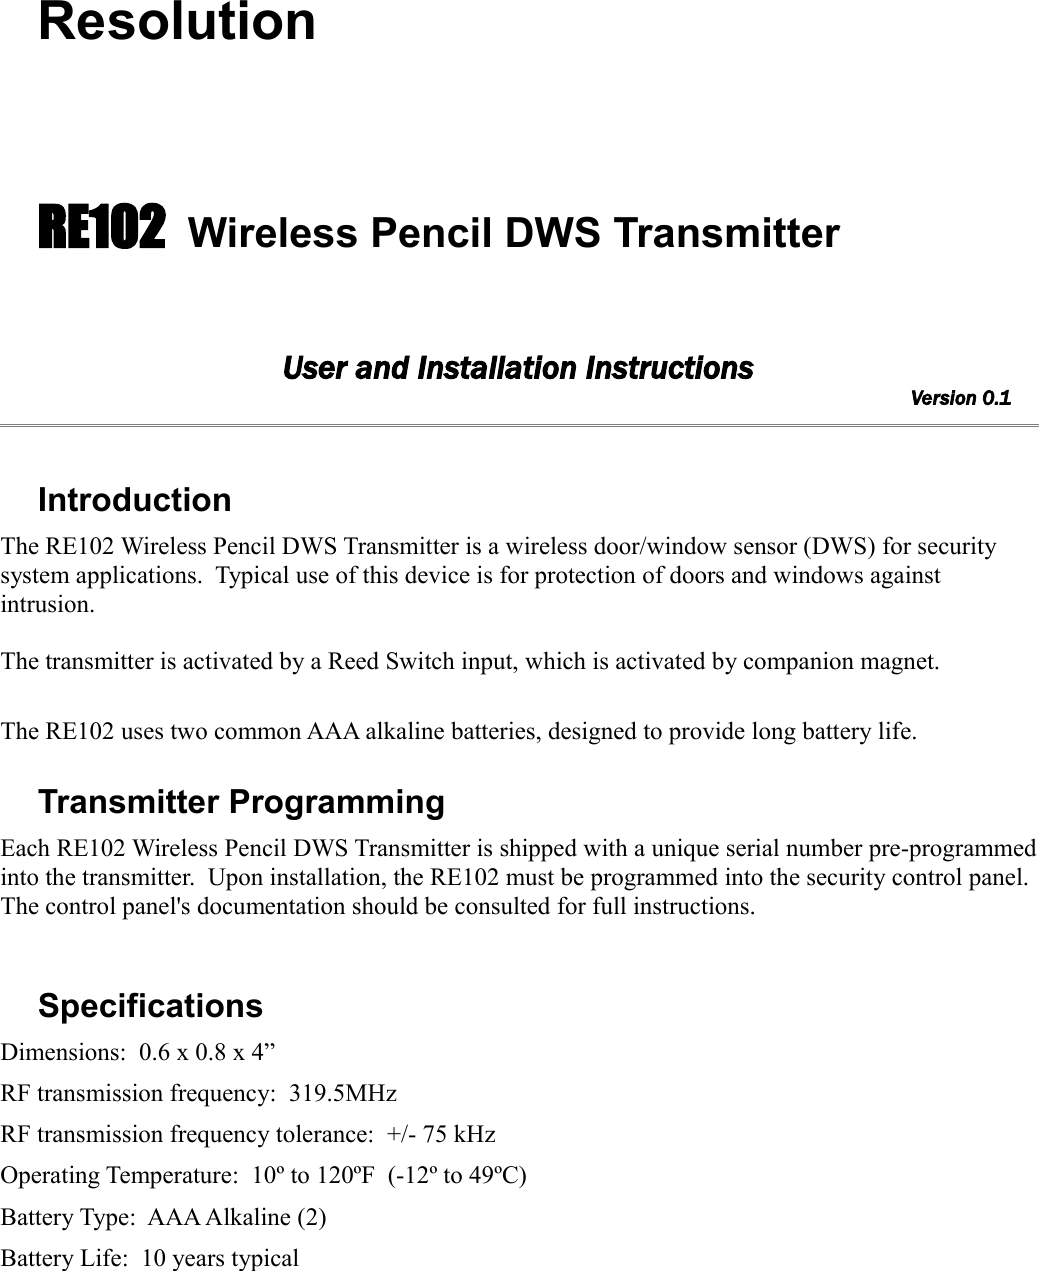 ResolutionRE102 Wireless Pencil DWS TransmitterUser and Installation InstructionsVersion 0.1     IntroductionThe RE102 Wireless Pencil DWS Transmitter is a wireless door/window sensor (DWS) for security system applications.  Typical use of this device is for protection of doors and windows against intrusion.  The transmitter is activated by a Reed Switch input, which is activated by companion magnet.The RE102 uses two common AAA alkaline batteries, designed to provide long battery life.  Transmitter ProgrammingEach RE102 Wireless Pencil DWS Transmitter is shipped with a unique serial number pre-programmed into the transmitter.  Upon installation, the RE102 must be programmed into the security control panel. The control panel&apos;s documentation should be consulted for full instructions.SpecificationsDimensions:  0.6 x 0.8 x 4”RF transmission frequency:  319.5MHzRF transmission frequency tolerance:  +/- 75 kHzOperating Temperature:  10º to 120ºF  (-12º to 49ºC)Battery Type:  AAA Alkaline (2)Battery Life:  10 years typical